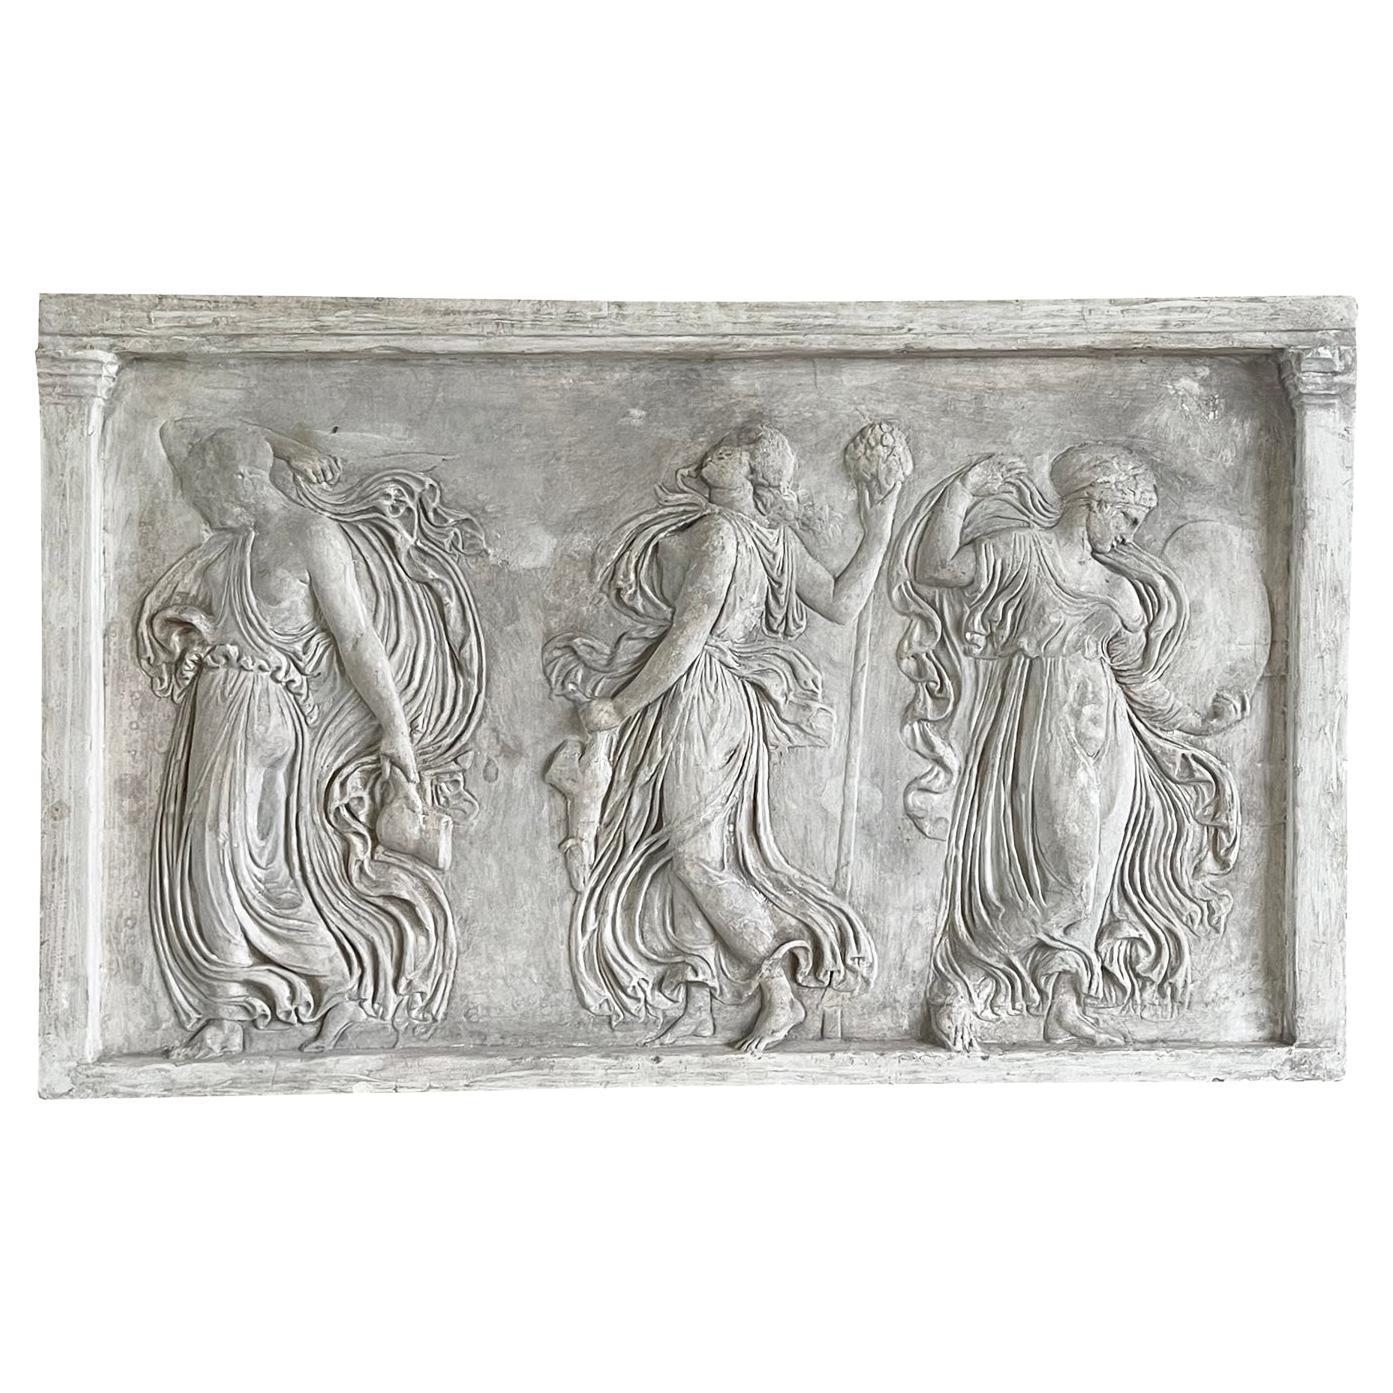 20th Century French Vintage Three Charites or Graces Plaster Relief